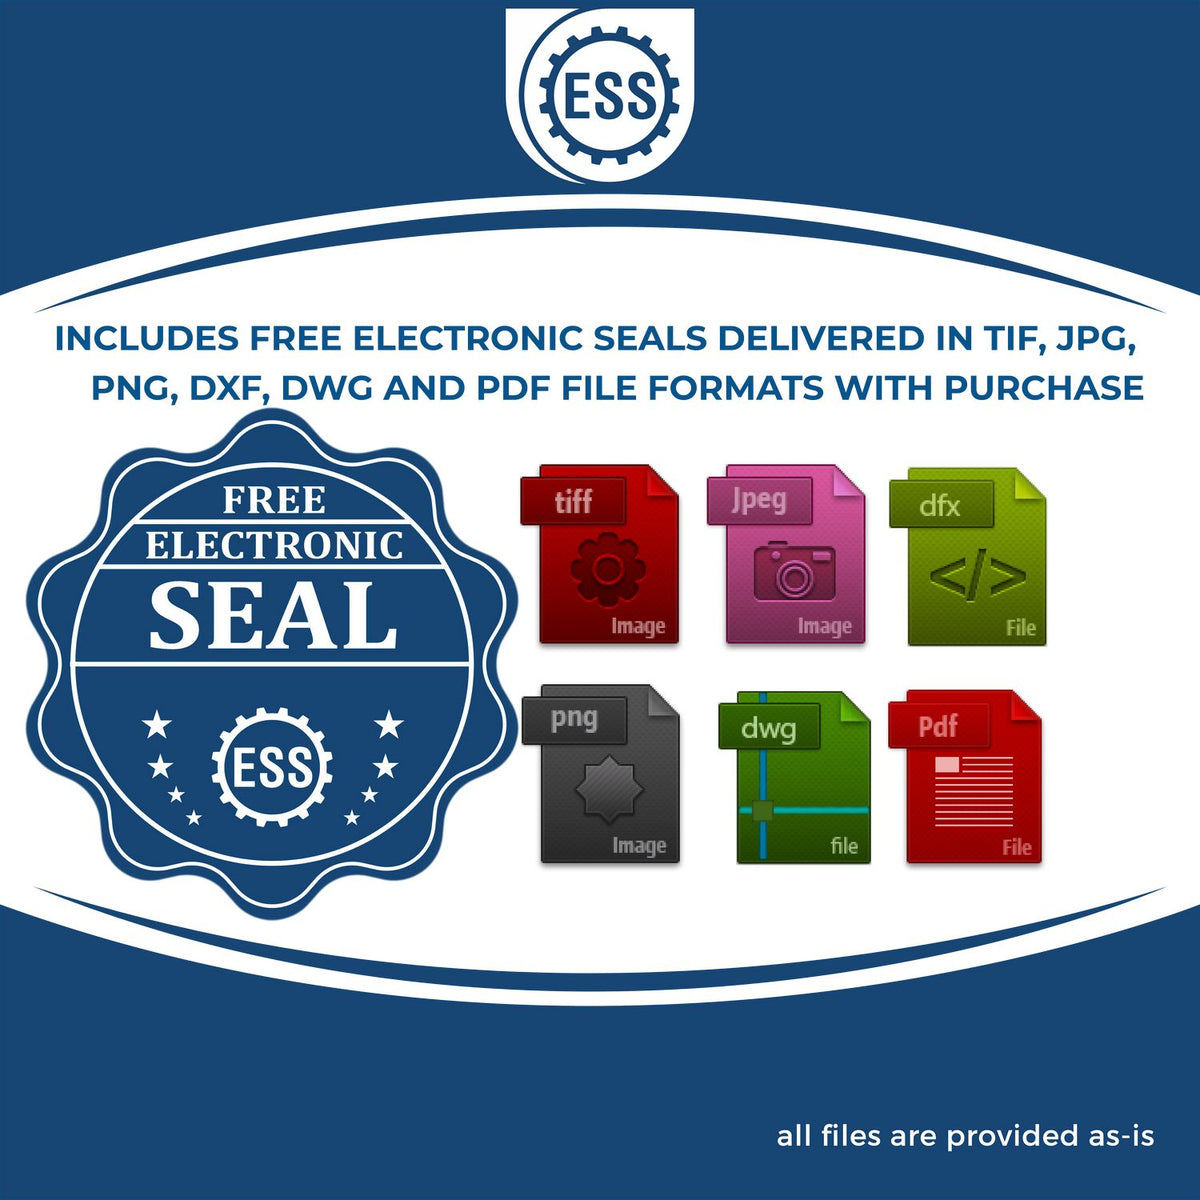 An infographic for the free electronic seal for the Slim Pre-Inked Wyoming Architect Seal Stamp illustrating the different file type icons such as DXF, DWG, TIF, JPG and PNG.